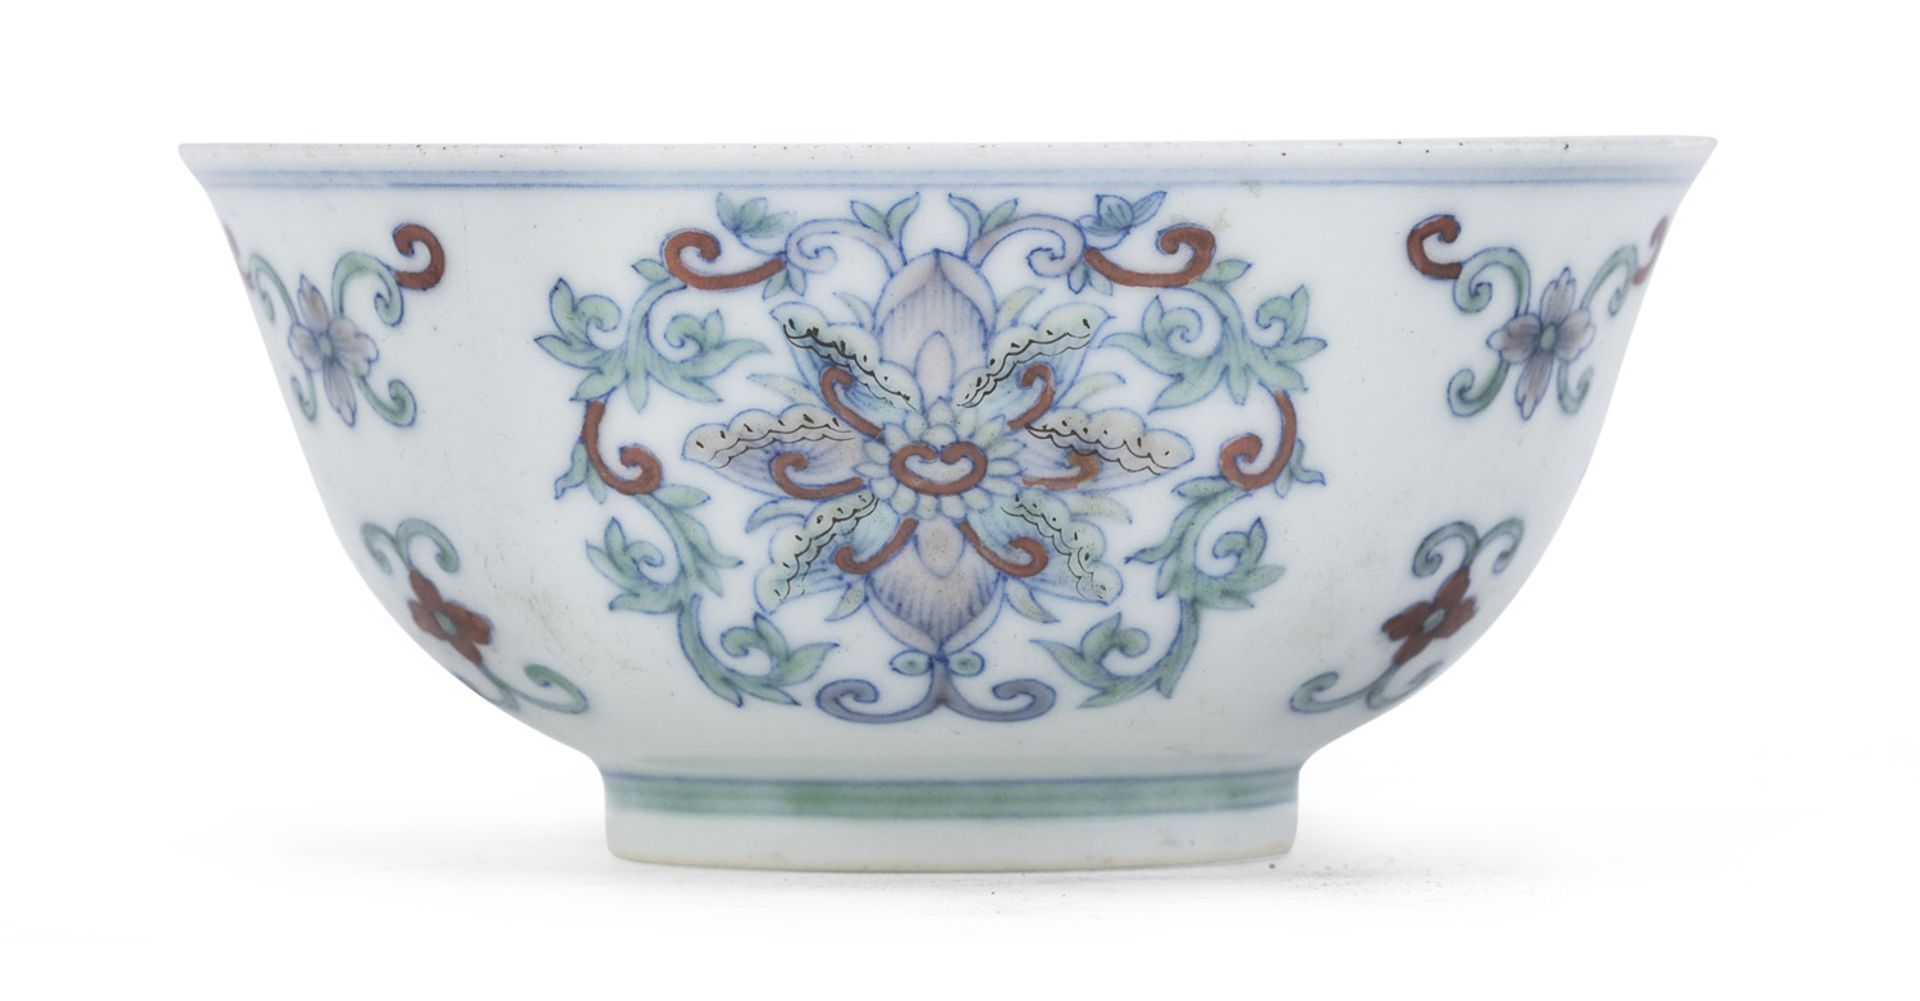 SMALL BOWL IN POLYCHROME ENAMELED PORCELAIN CHINA LATE 19th EARLY 20th CENTURY